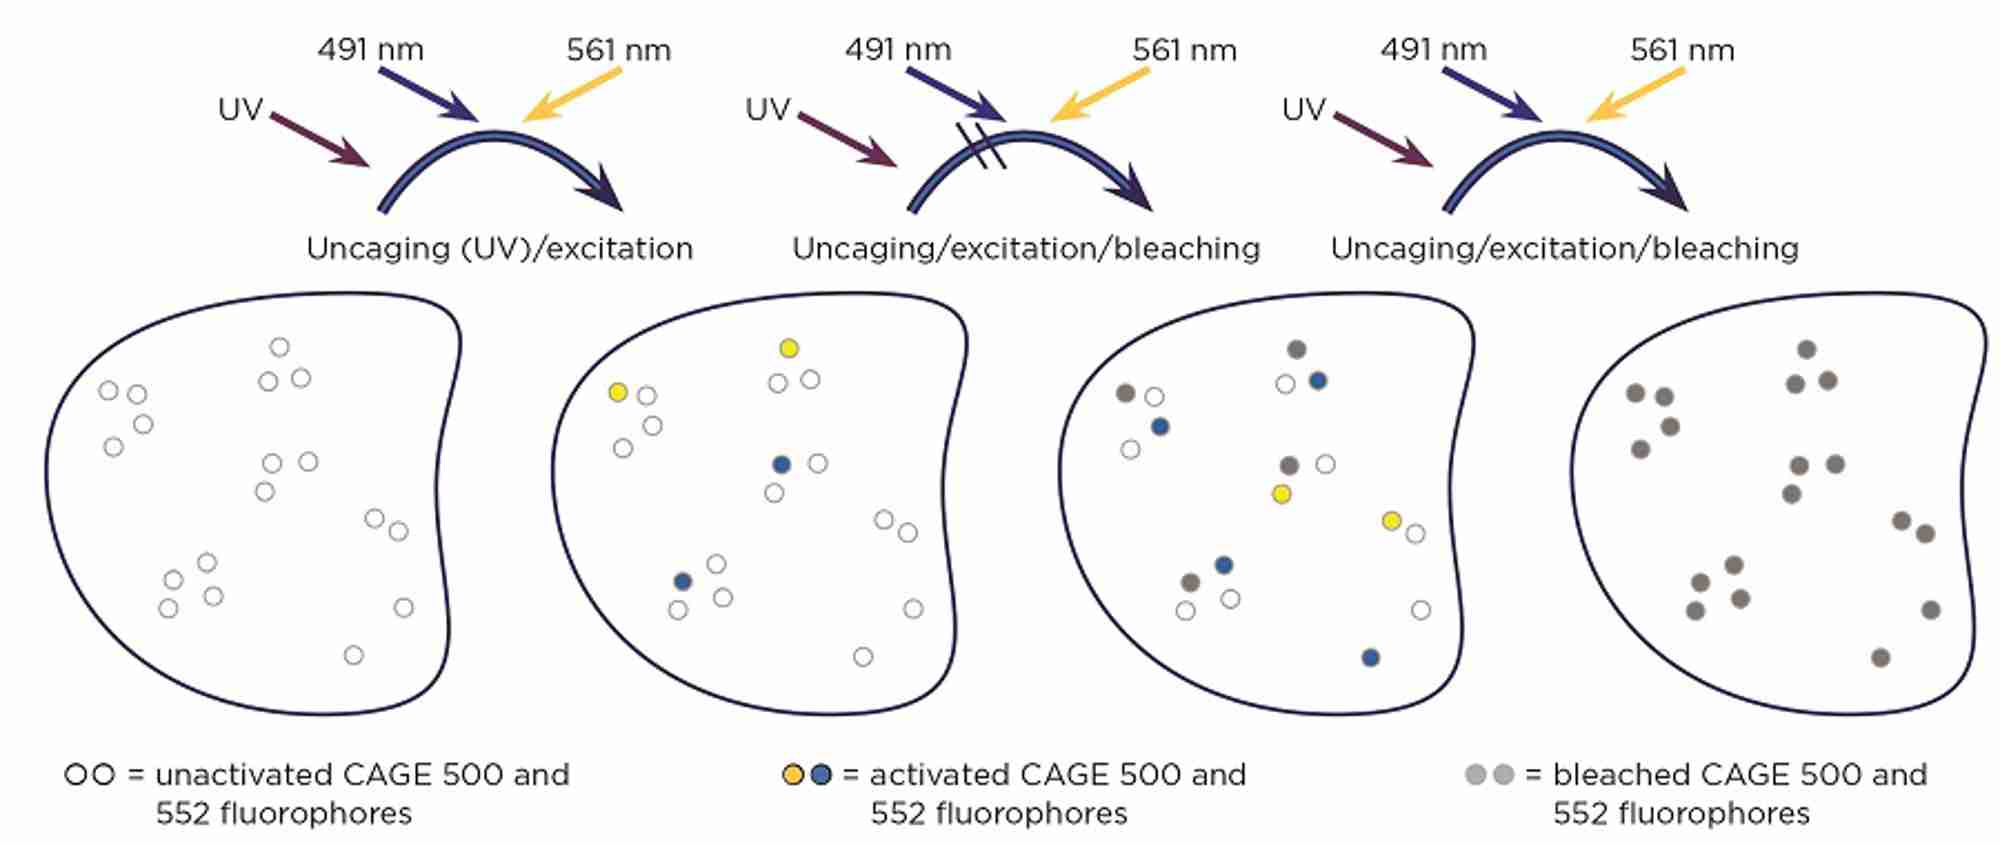 Figure 2. The principles of PALM. Fluorophores are activated by UV, and detected and photo-bleached by fluorophore-defined laser wavelengths. Multiple cycles of activation, detection and bleaching are carried out, until all fluorophores are bleached.  Adapted from Journal of Biological Chemistry 290 3875-3892